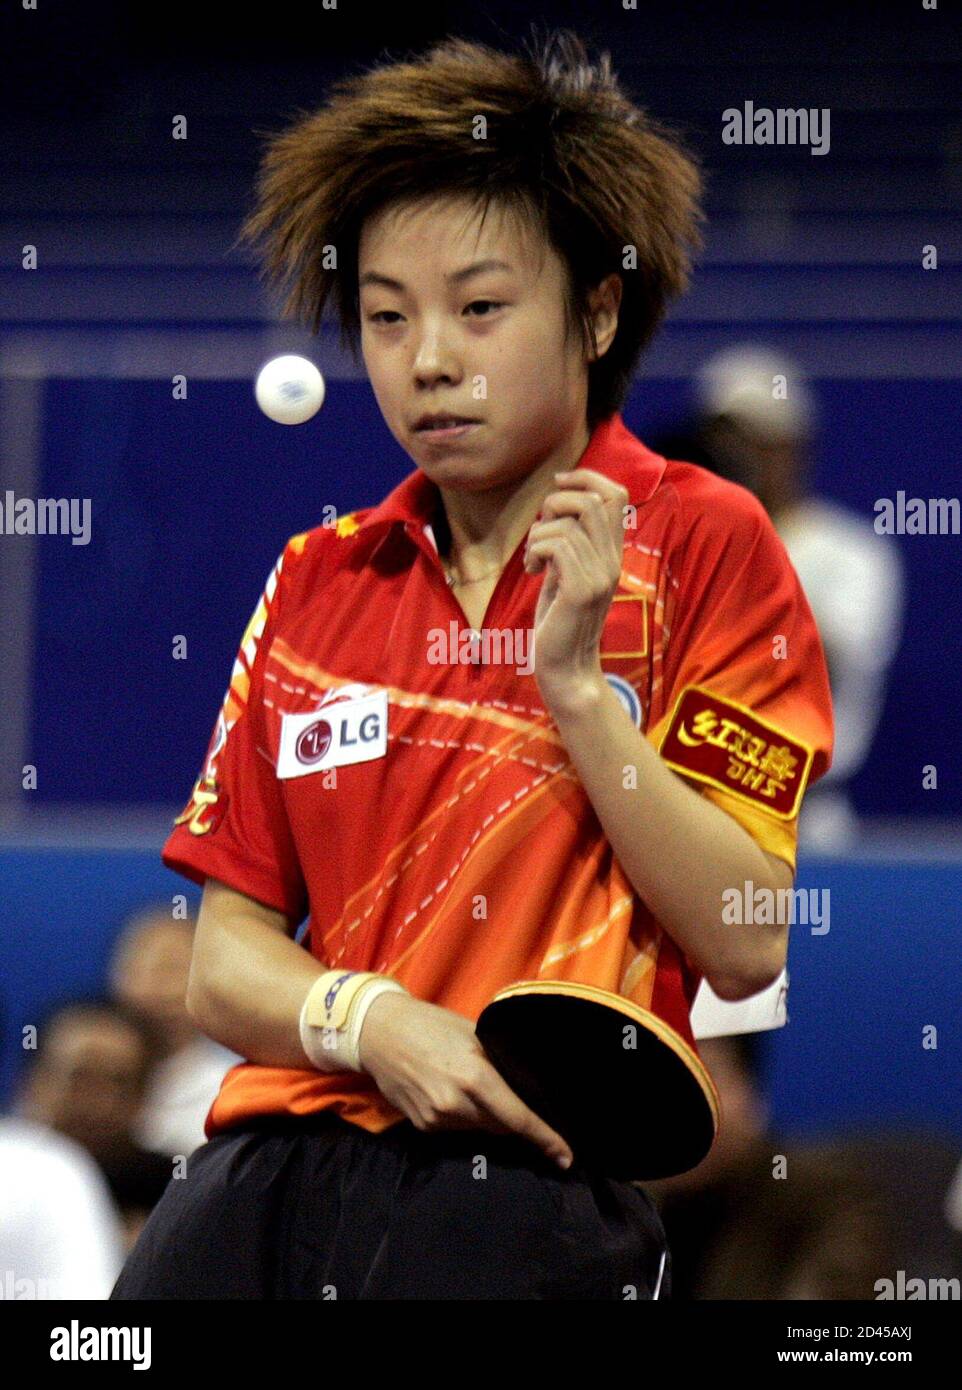 Chinese player Zhang plays a shot in match against Guo and Yan of China at  48th World Table Tennis Championships in Shanghai. Chinese player Zhang  Yining plays a shot in her mixed